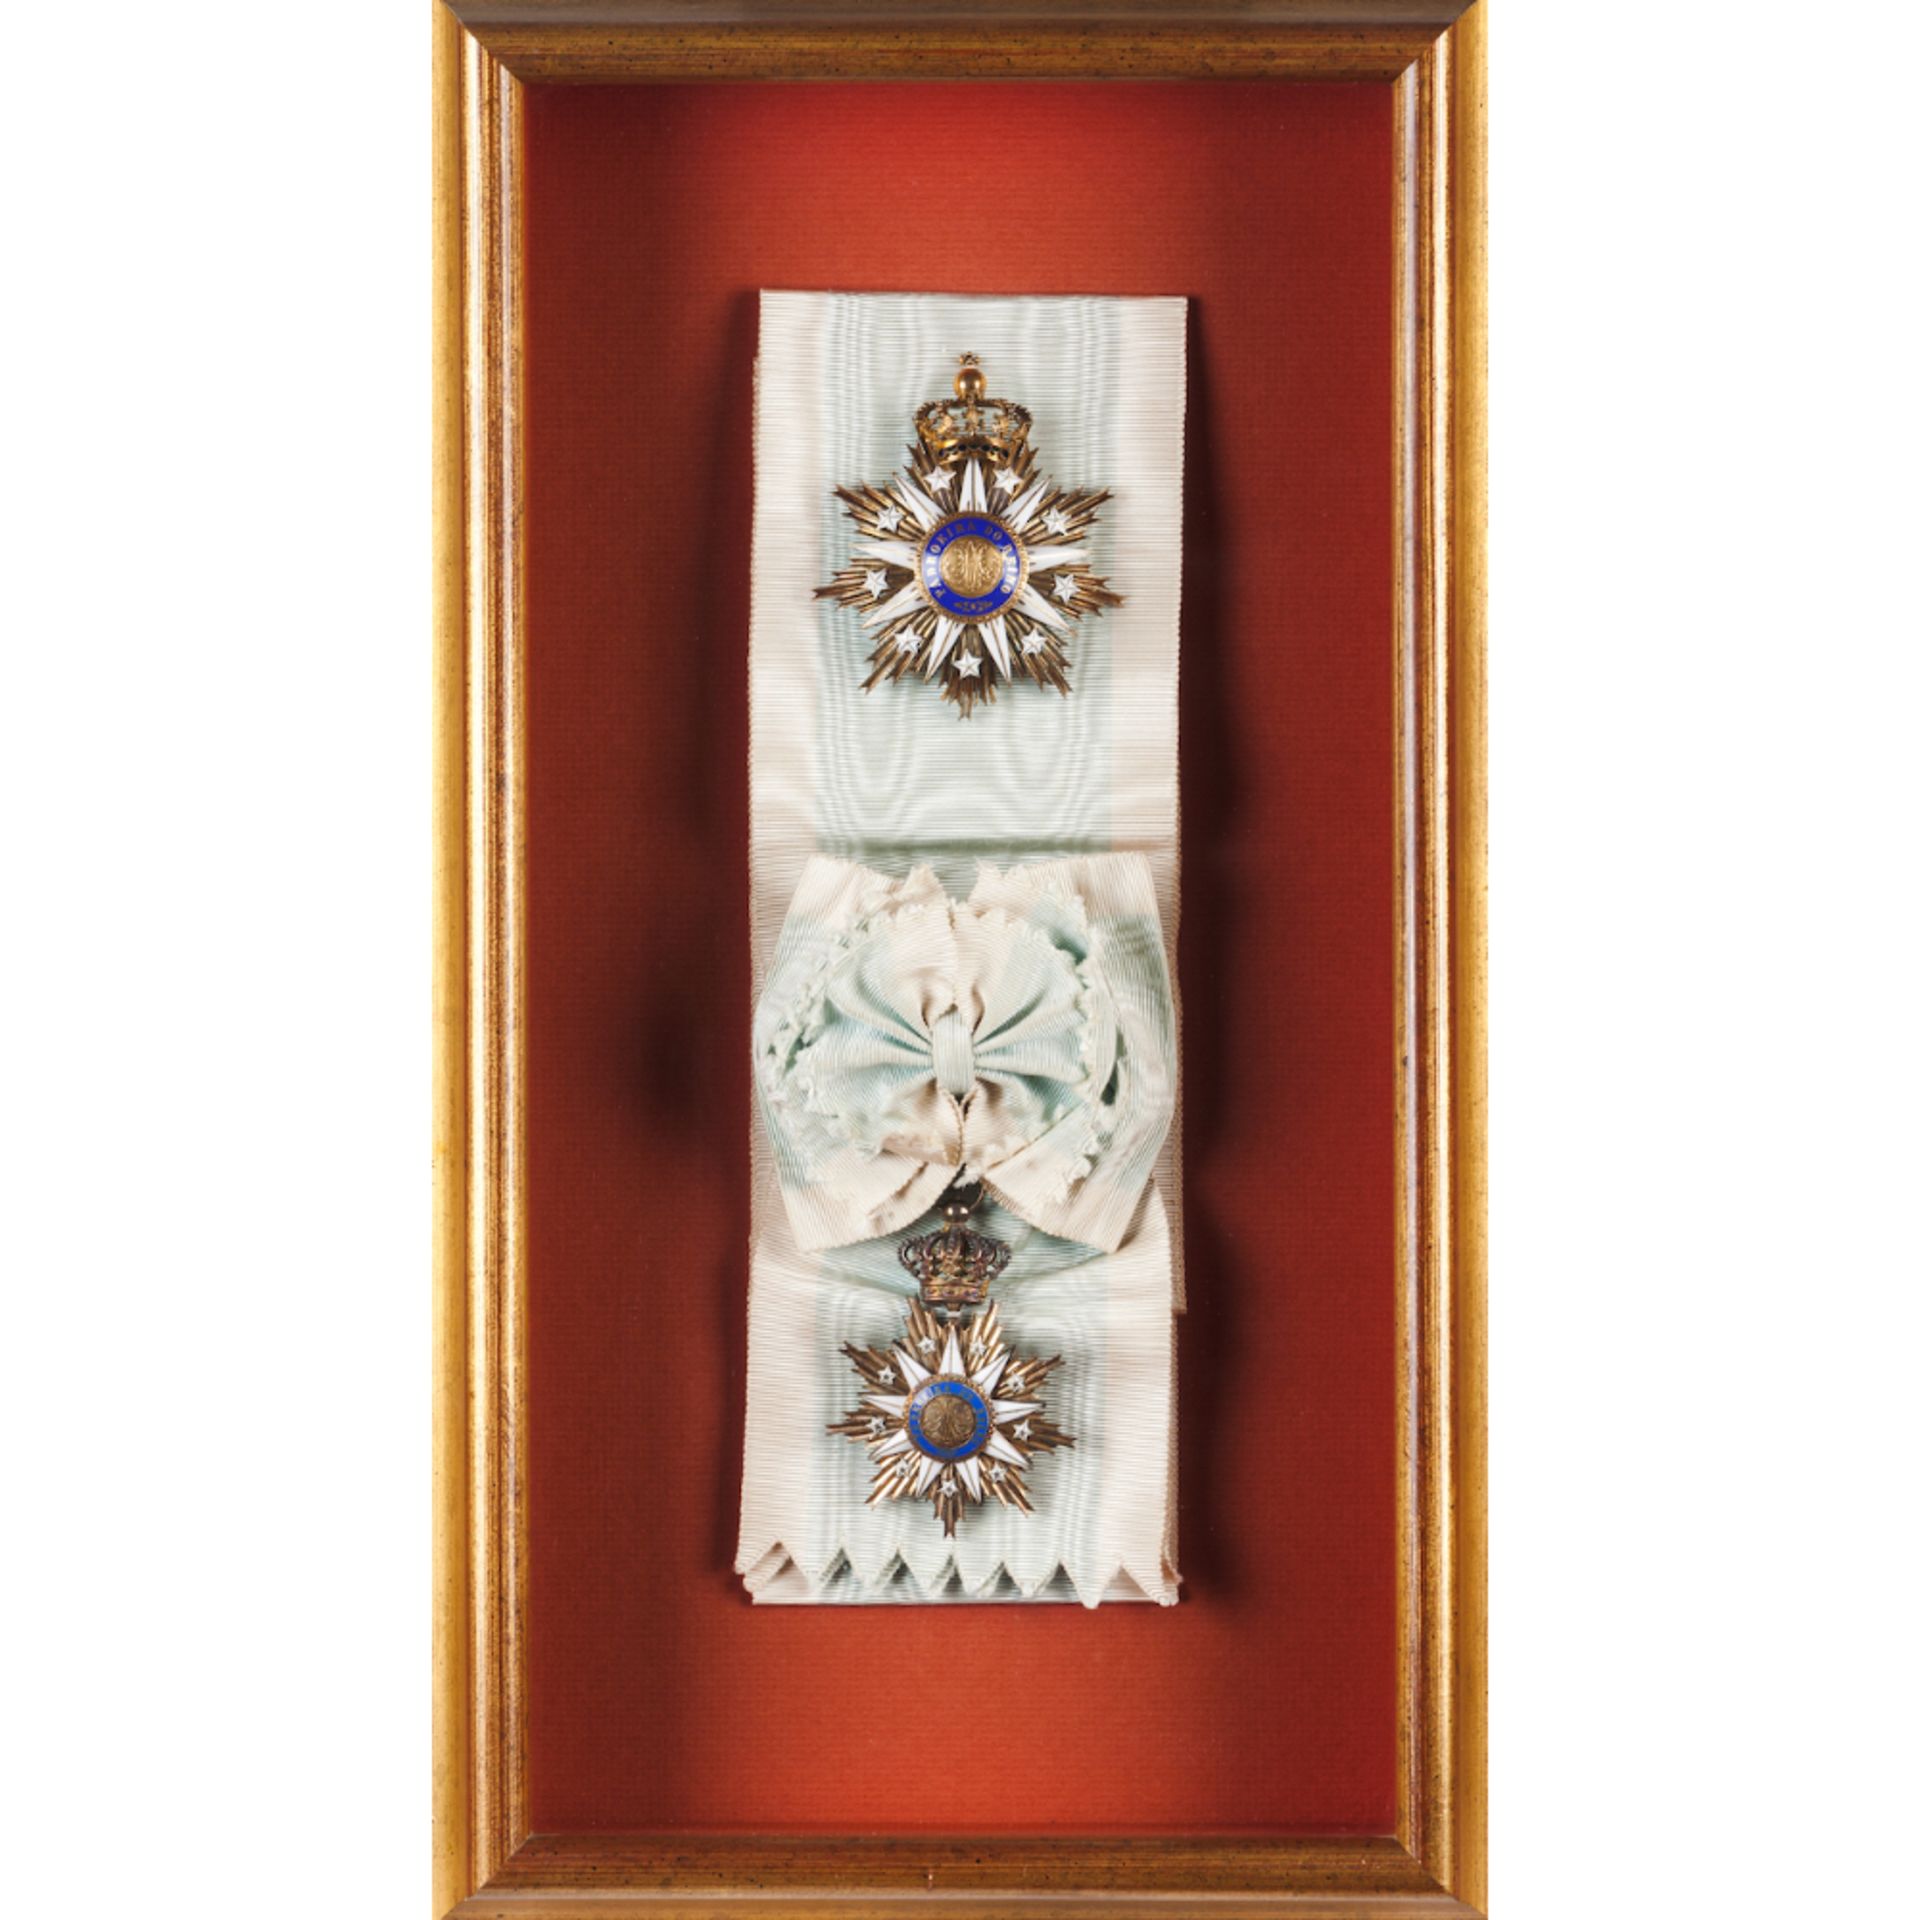 A Great Cross for the Order of Our Lady of Vila ViçosaPlaque and band Enamelled silver Portugal,